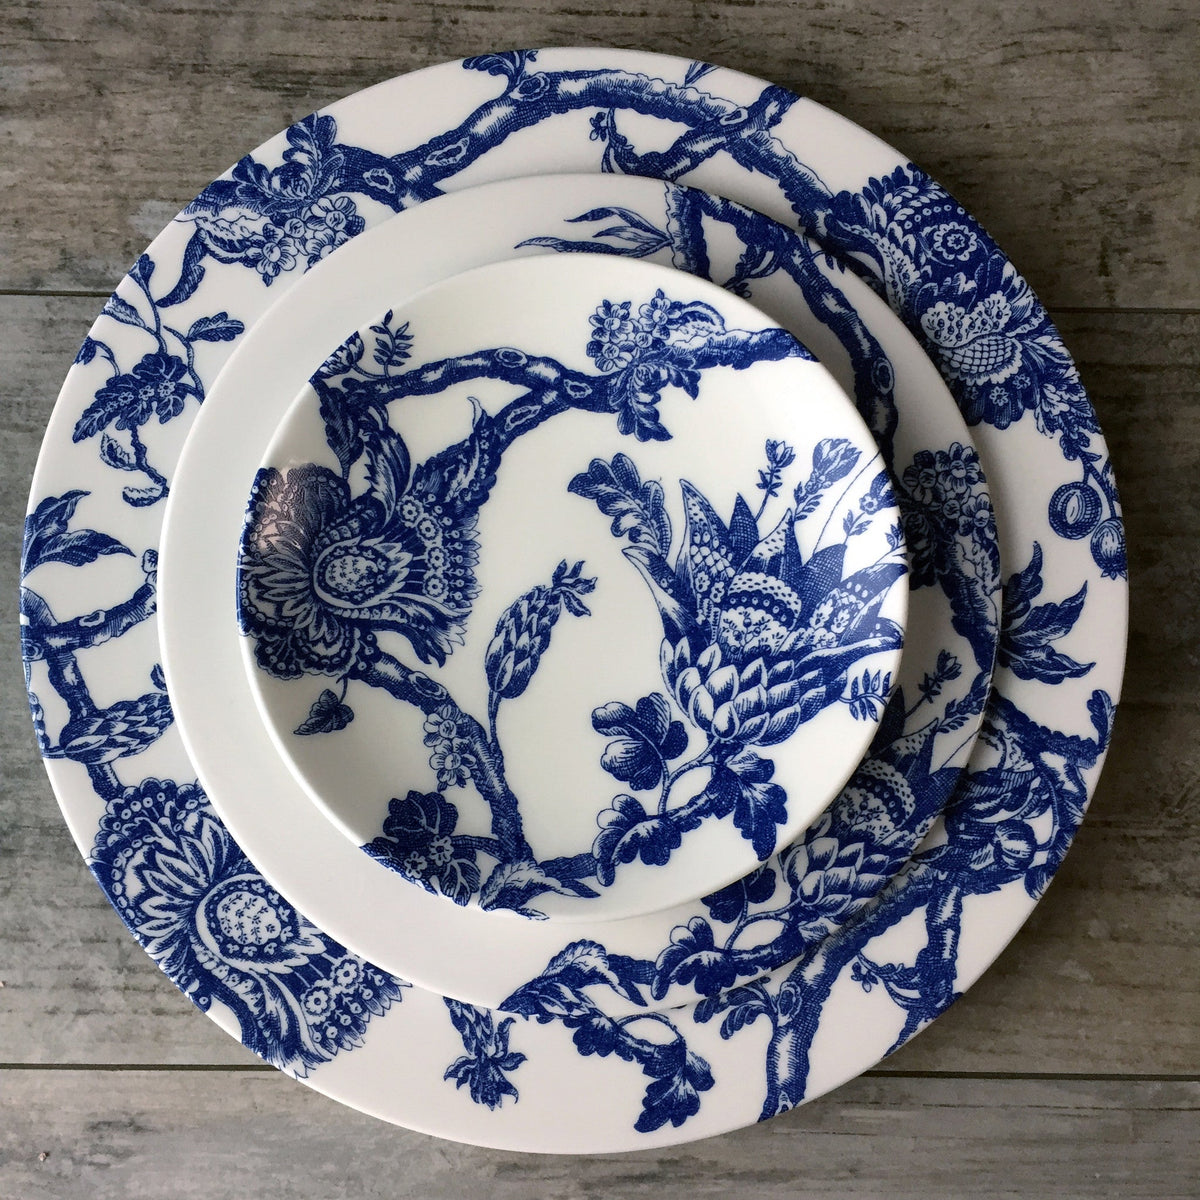 Three stacked white Arcadia Rimmed Salad Plates with intricate blue floral patterns on a gray wooden surface, crafted from Caskata Artisanal Home dinnerware inspired by the Williamsburg Foundation collection.